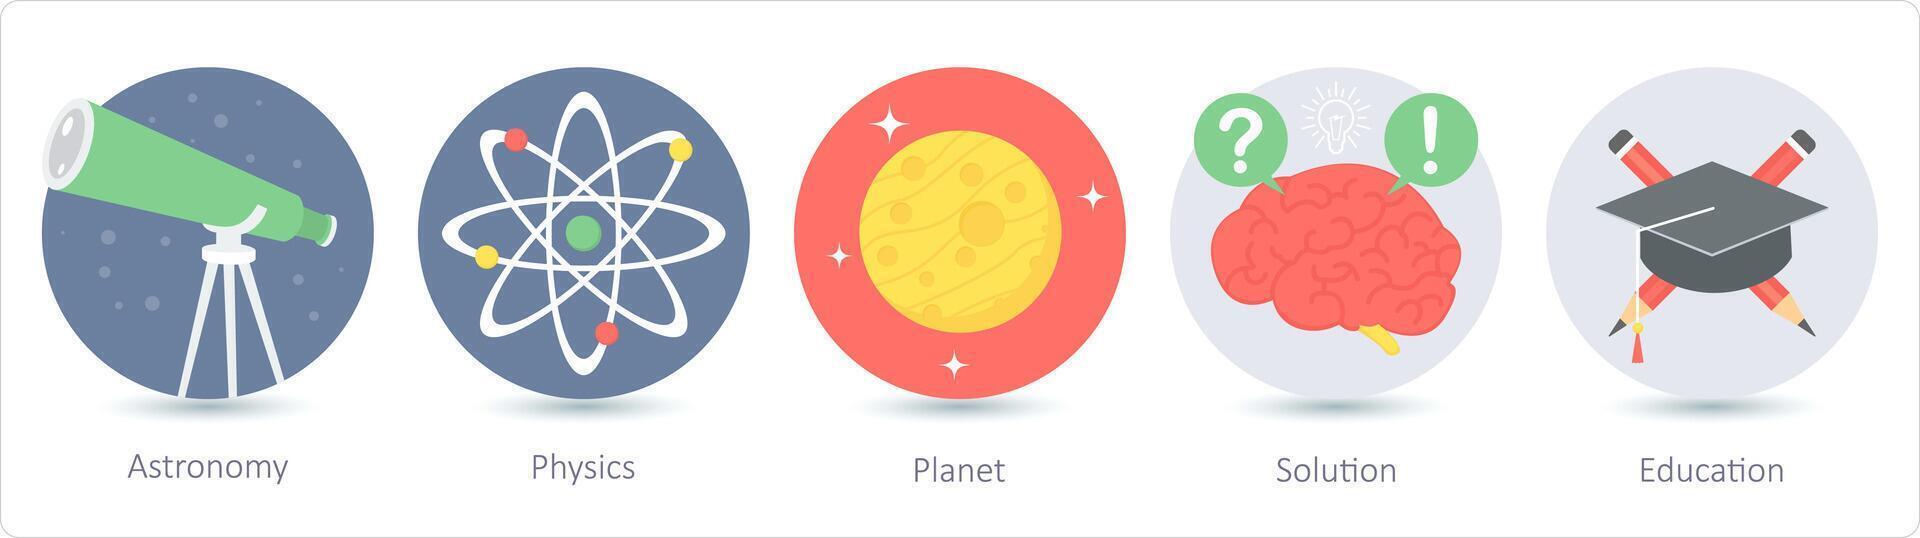 A set of 5 education icons as astronomy, physics, planet vector